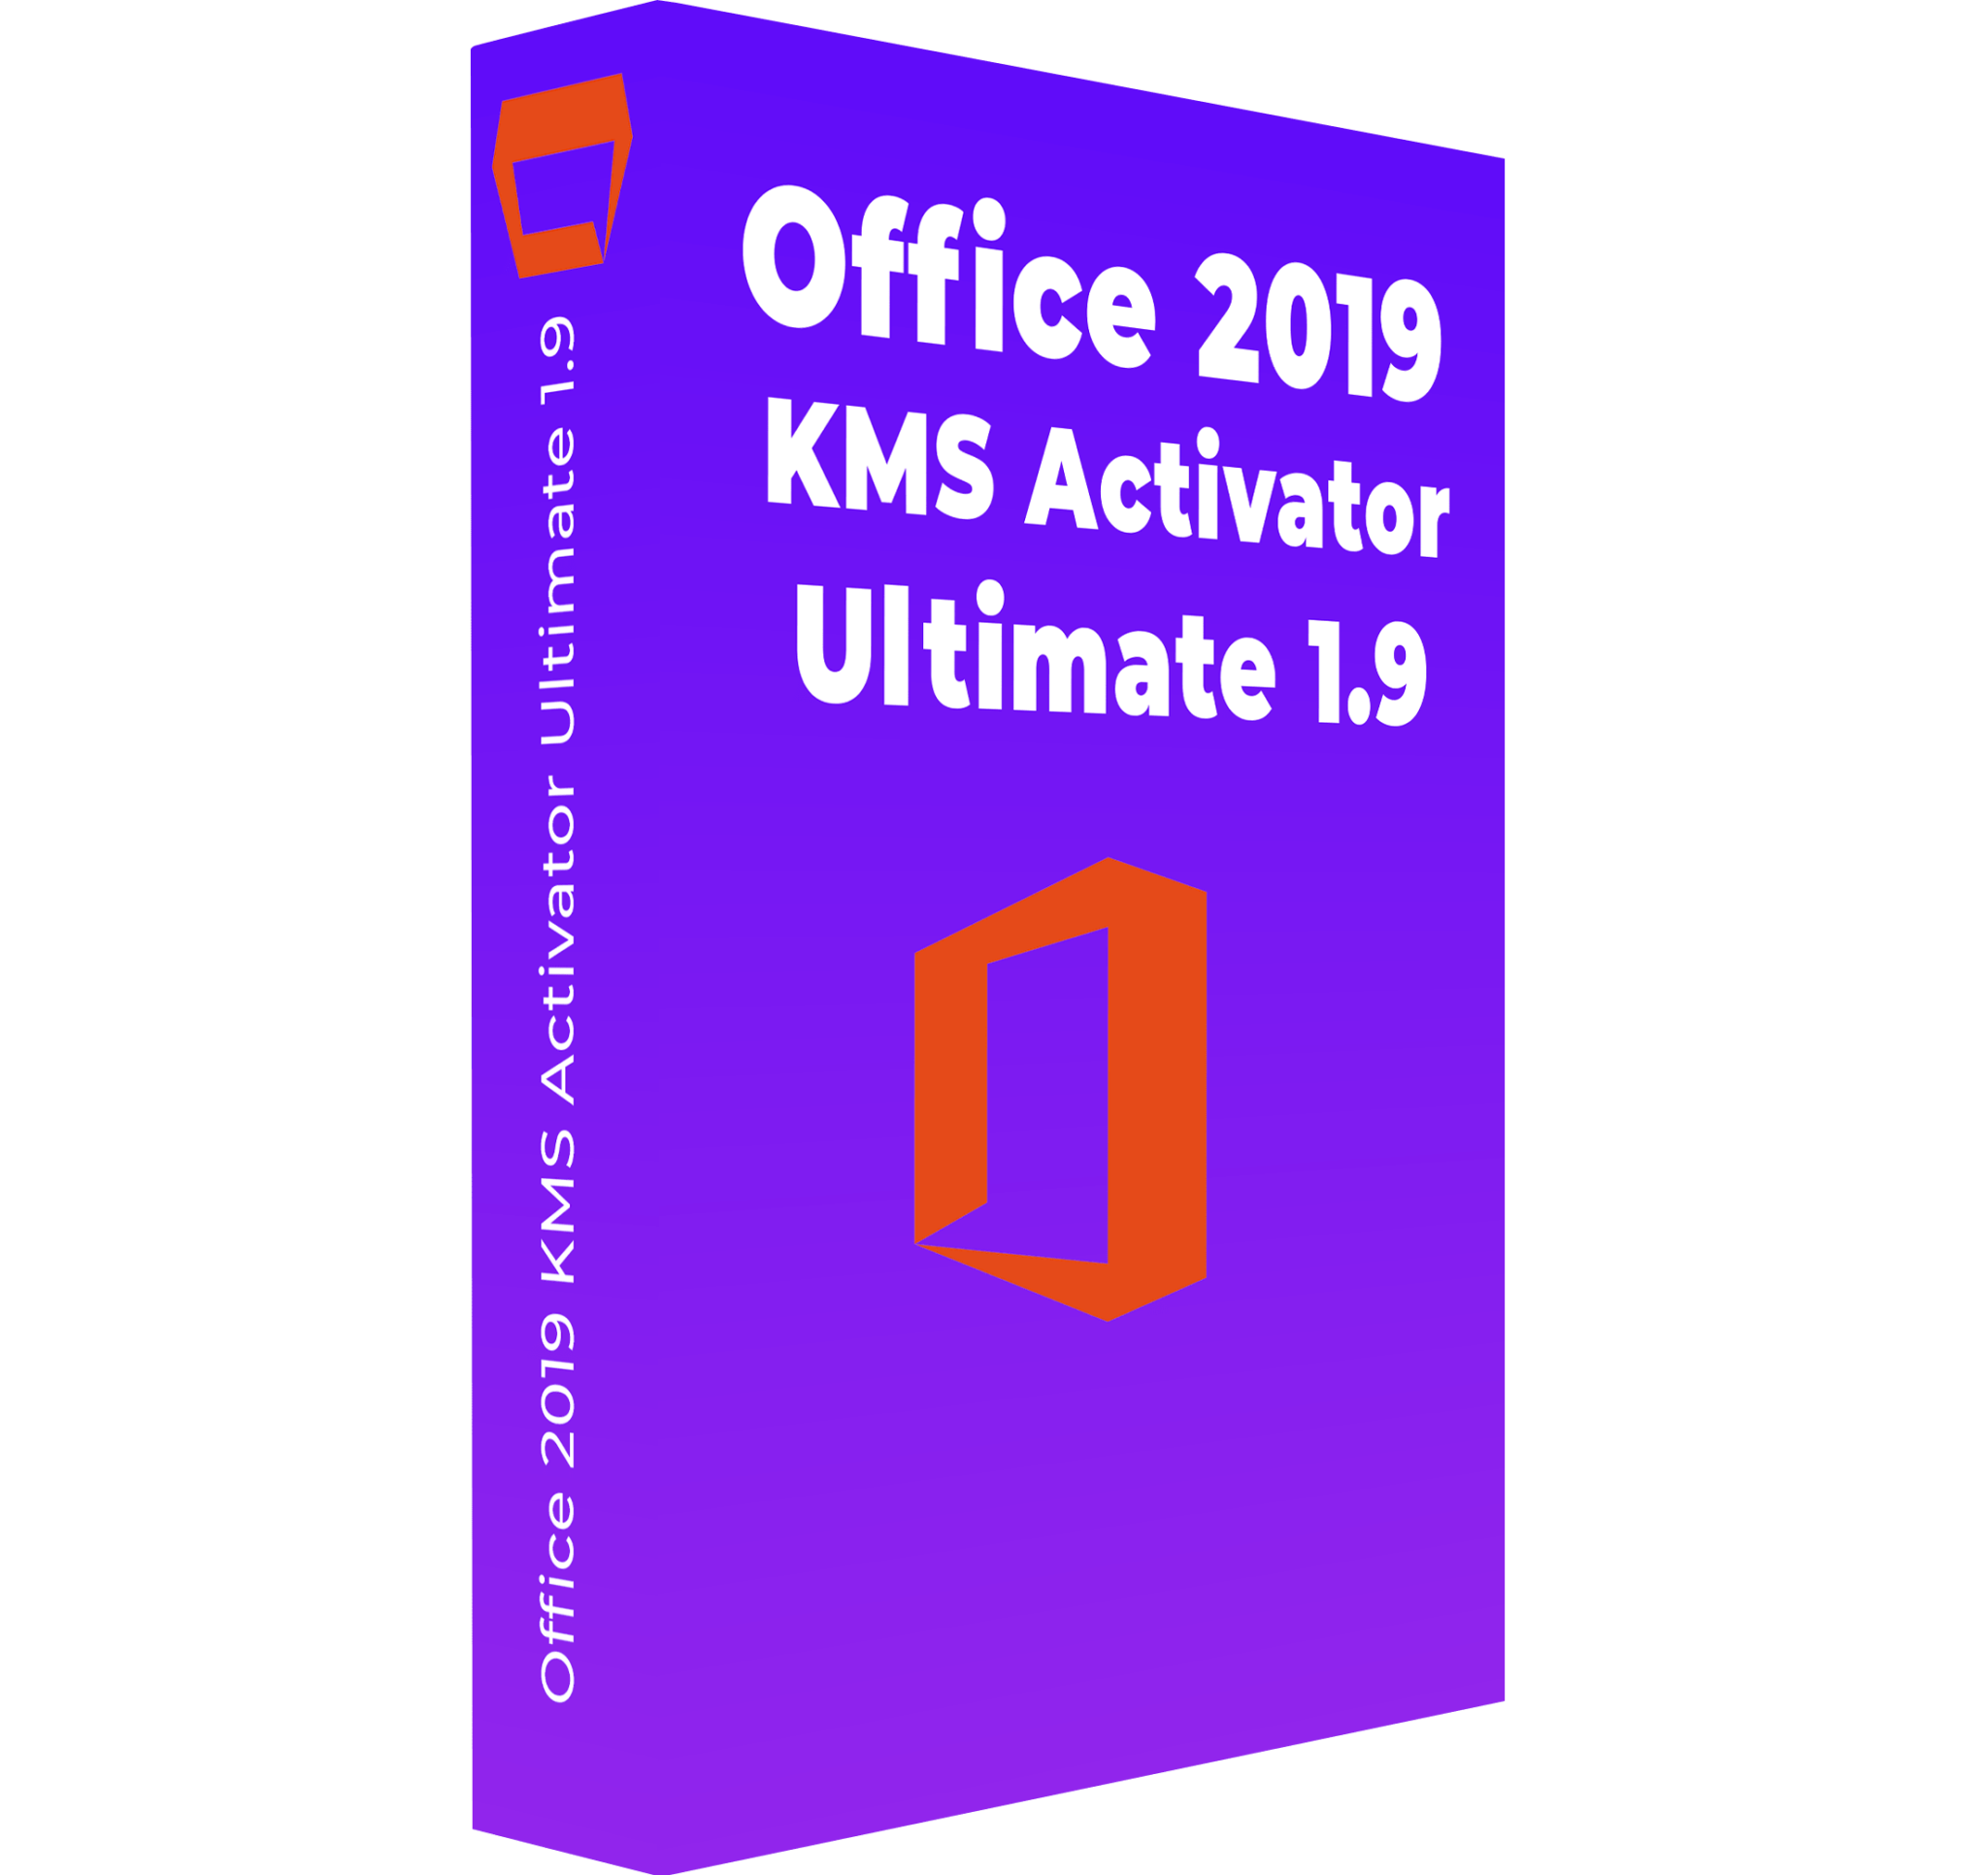 kms activator office 2019